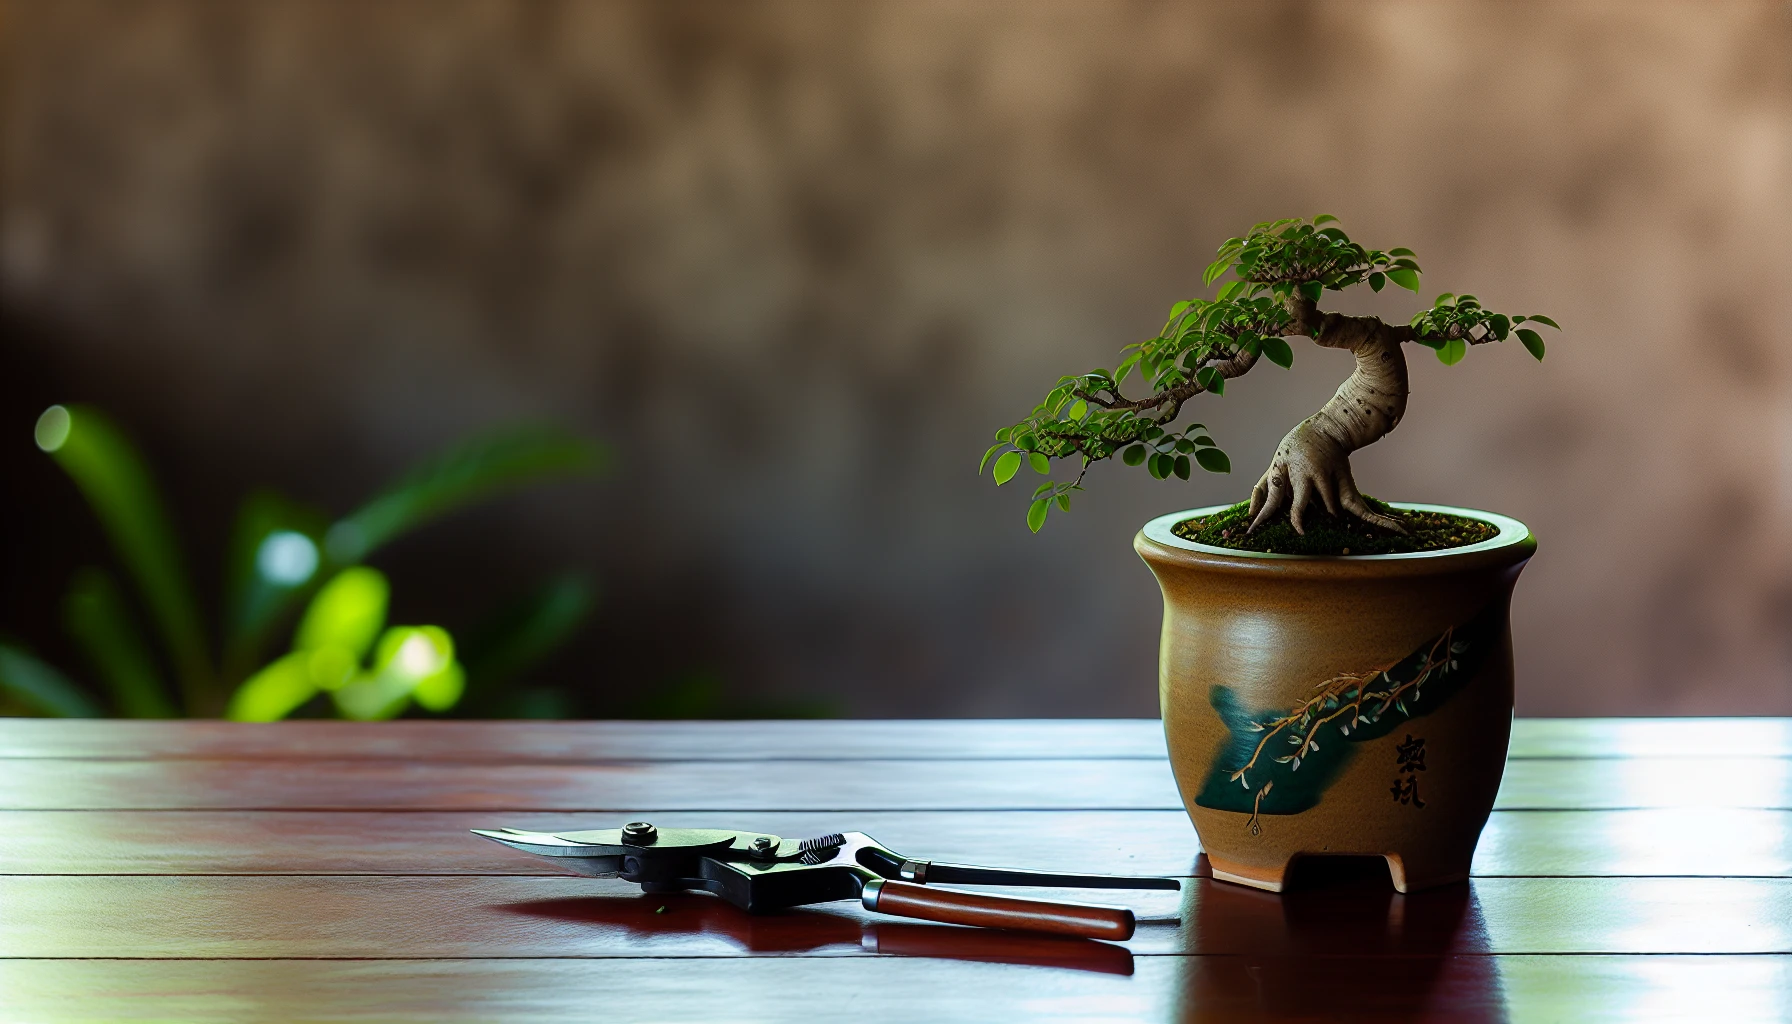 Bonsai tree with small pot and pruning shears